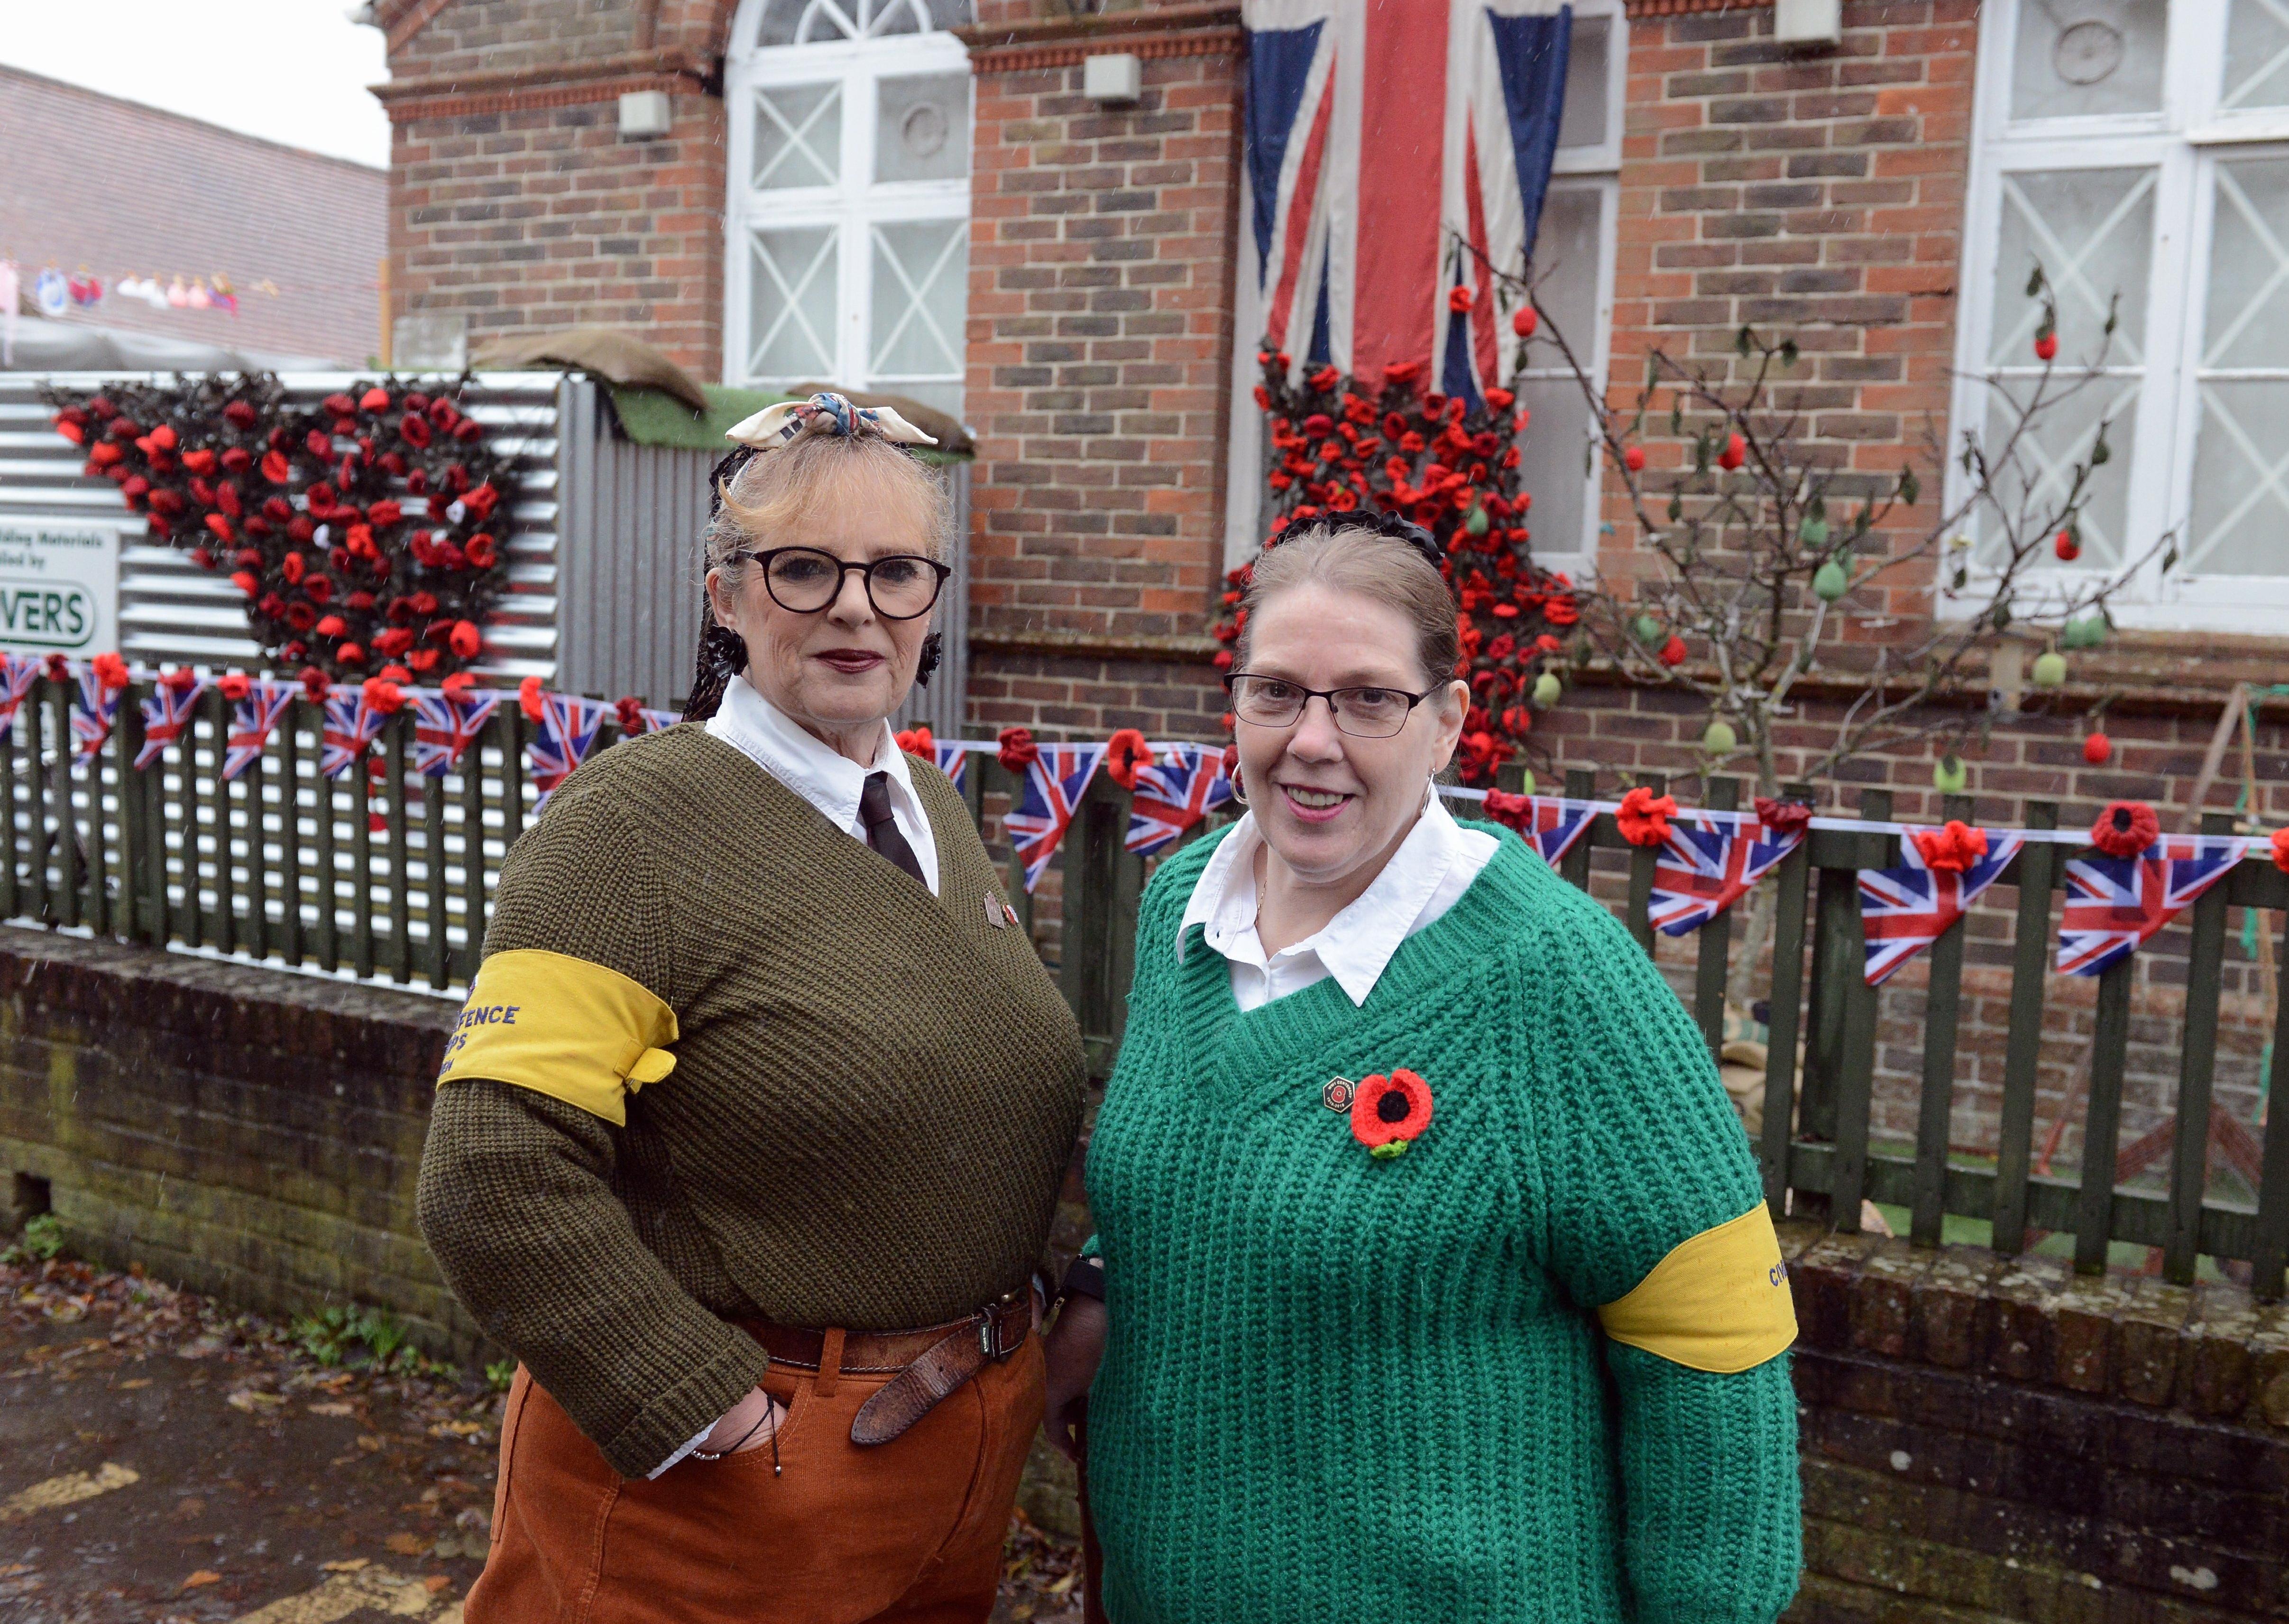 Amanda Stringer and Ruth Brewer outside the decorated building